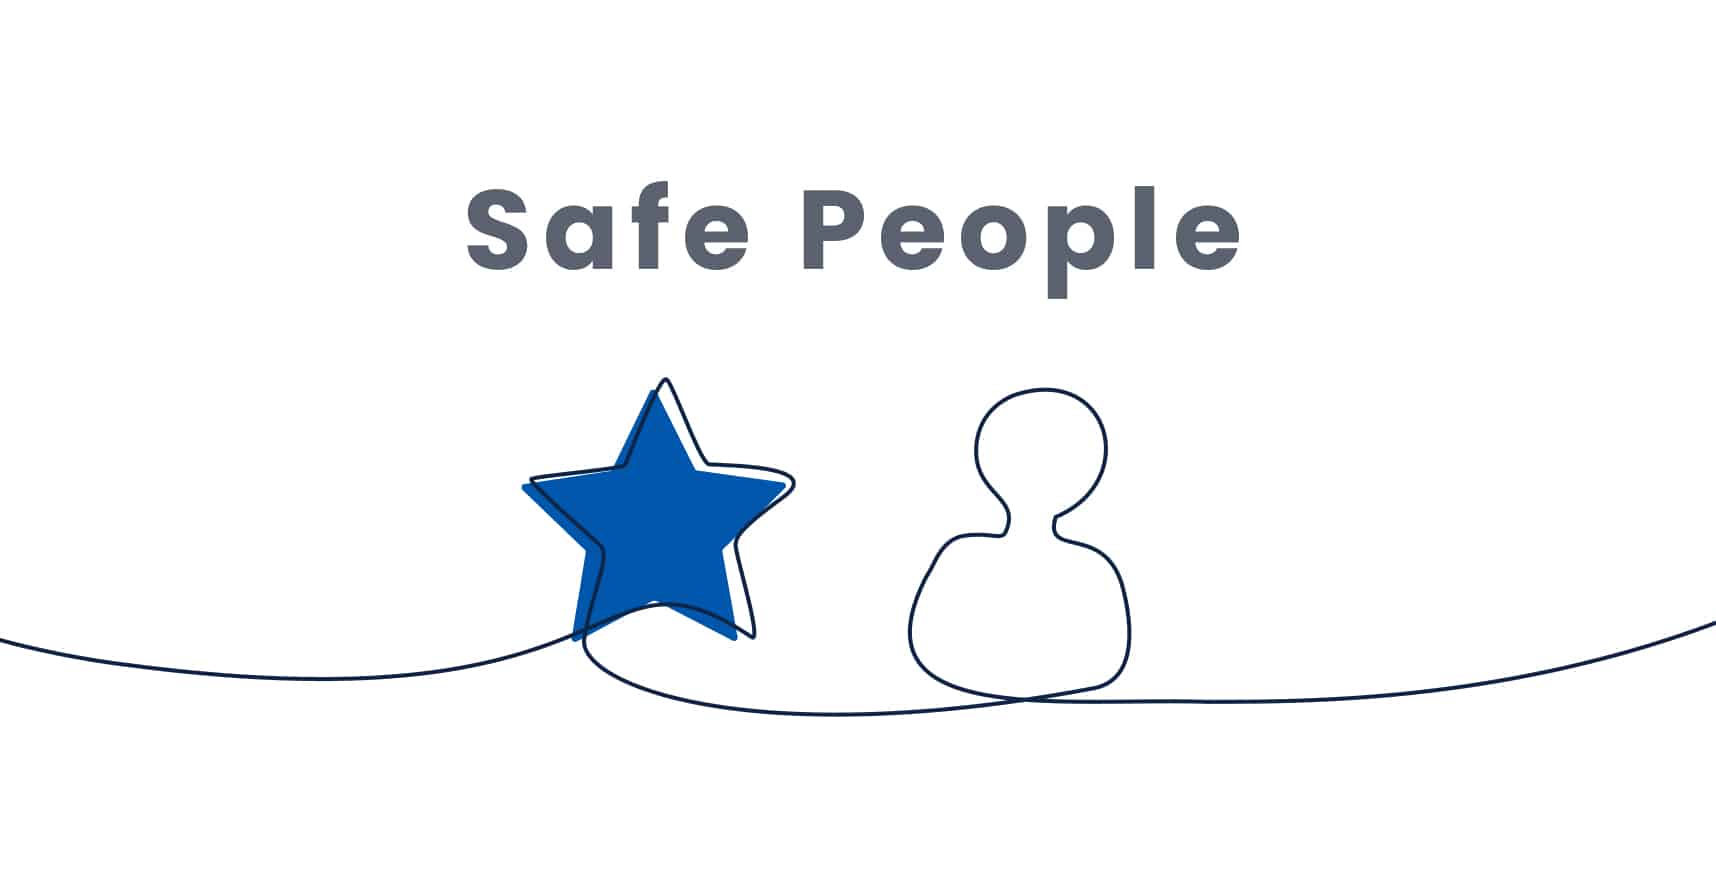 Line drawing of a star connected by a continuous line to a simple outline of a person, with the text "Safe People" above in a plain font.